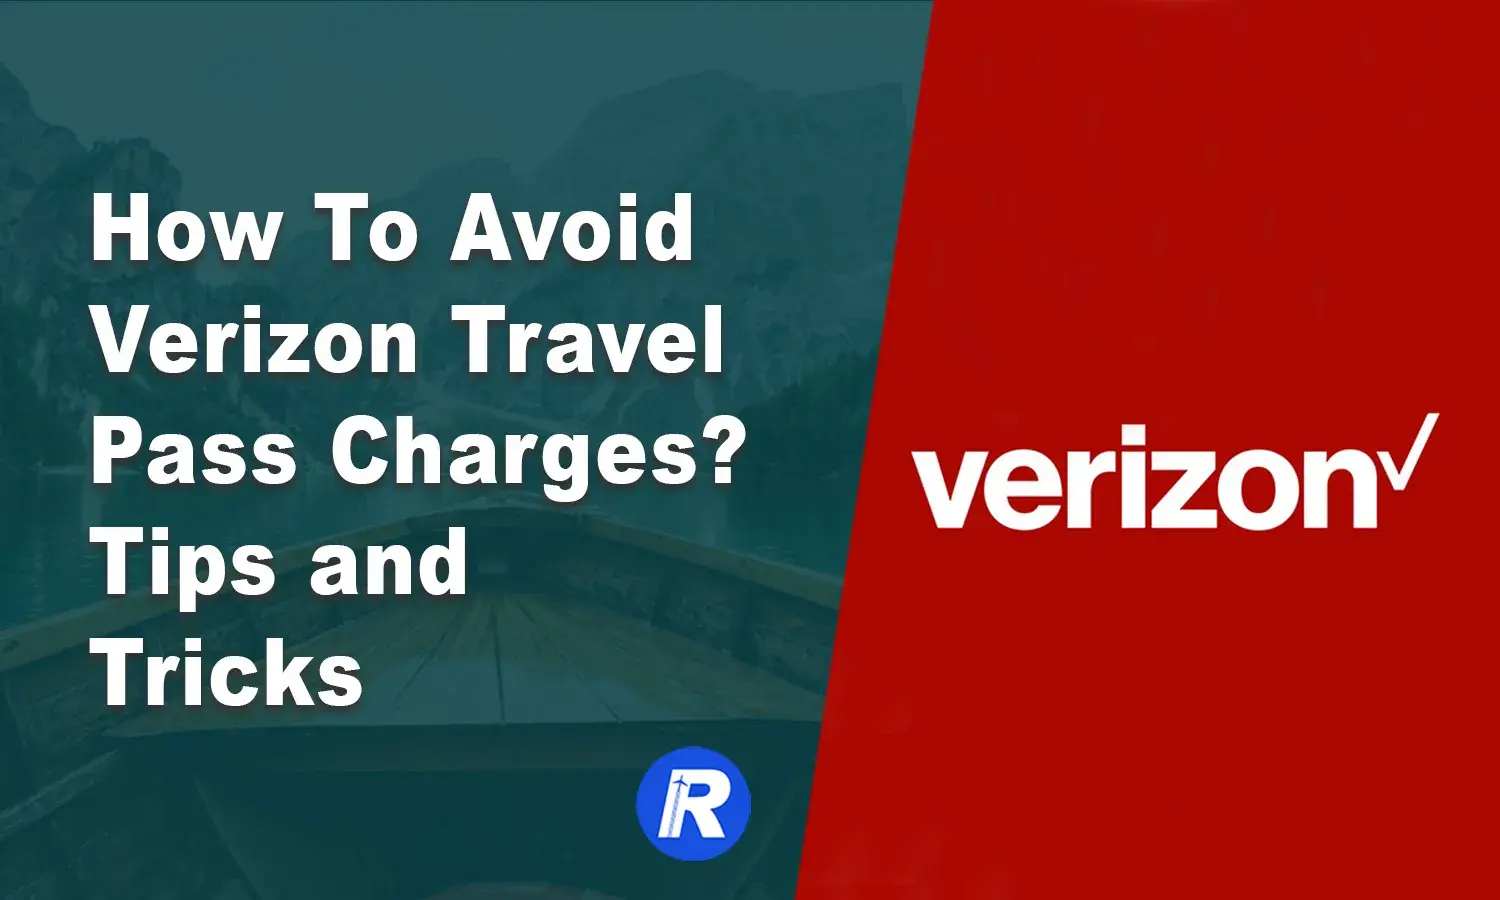 How To Avoid Verizon Travel Pass Charges Tips and Tricks